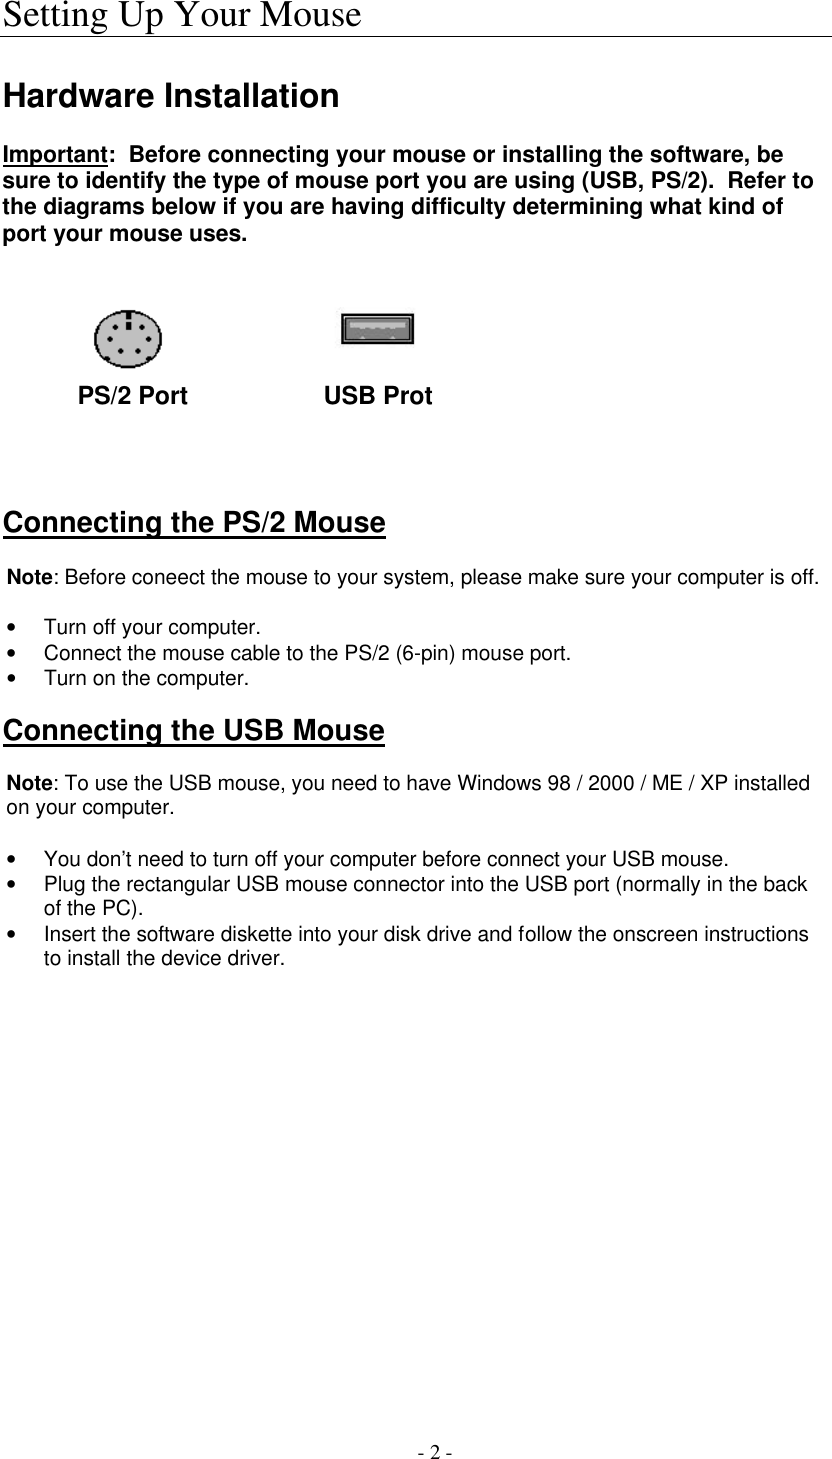   - 2 - Setting Up Your Mouse  Hardware Installation  Important:  Before connecting your mouse or installing the software, be sure to identify the type of mouse port you are using (USB, PS/2).  Refer to the diagrams below if you are having difficulty determining what kind of port your mouse uses.             PS/2 Port              USB Prot     Connecting the PS/2 Mouse  Note: Before coneect the mouse to your system, please make sure your computer is off.  • Turn off your computer. • Connect the mouse cable to the PS/2 (6-pin) mouse port. • Turn on the computer.   Connecting the USB Mouse  Note: To use the USB mouse, you need to have Windows 98 / 2000 / ME / XP installed on your computer.  • You don’t need to turn off your computer before connect your USB mouse. • Plug the rectangular USB mouse connector into the USB port (normally in the back of the PC). • Insert the software diskette into your disk drive and follow the onscreen instructions to install the device driver.  